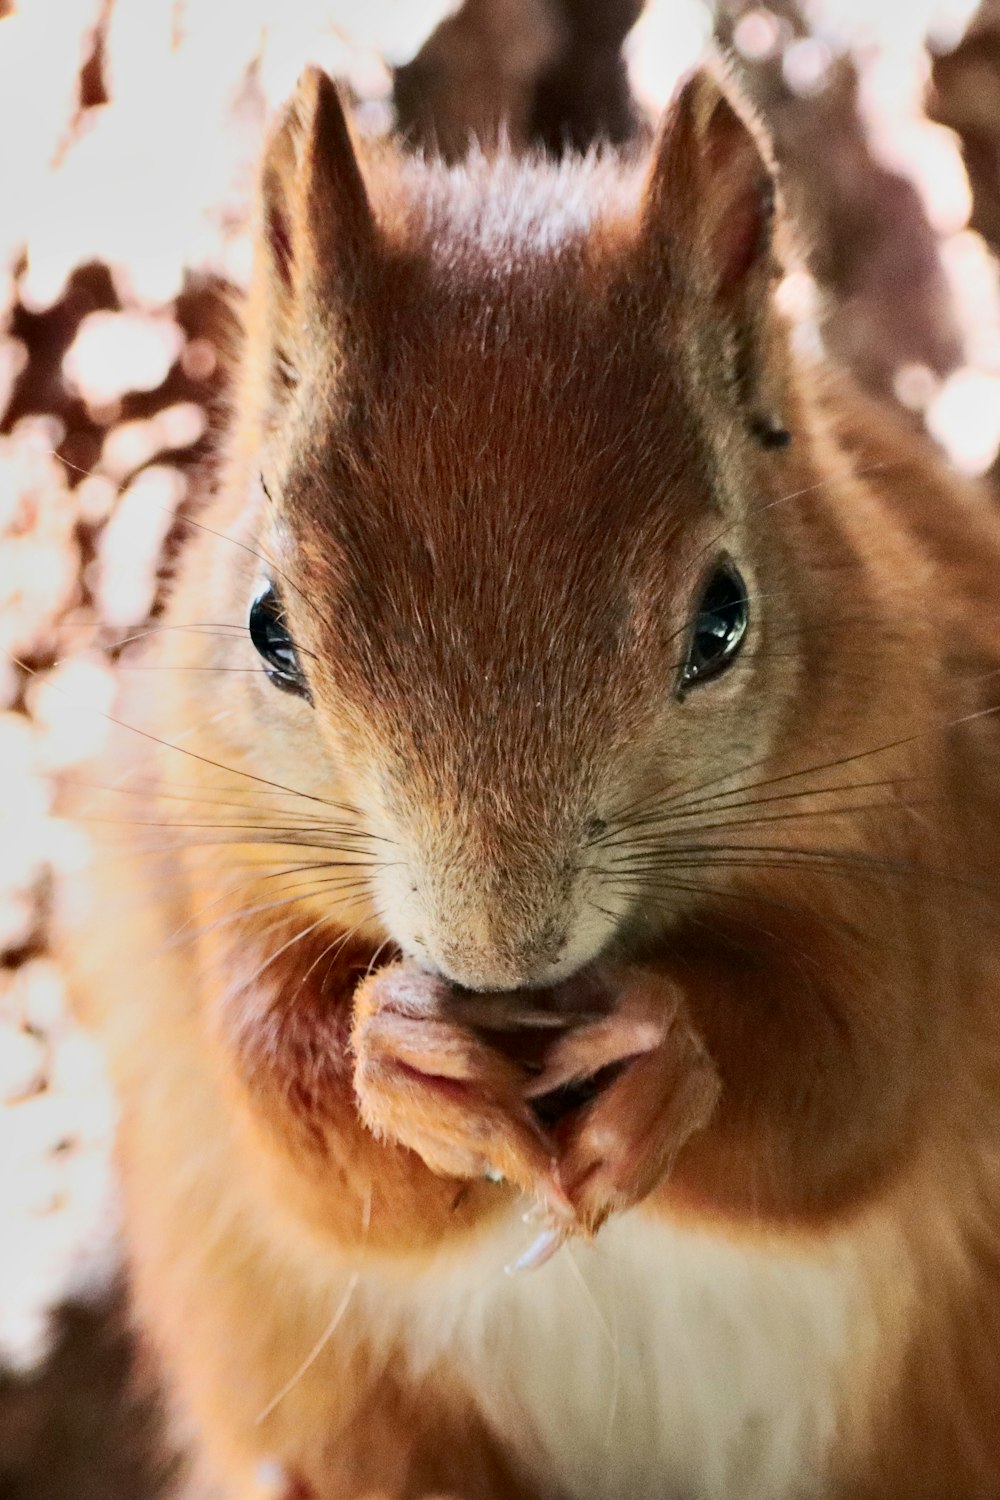 a close up of a squirrel with a bow tie